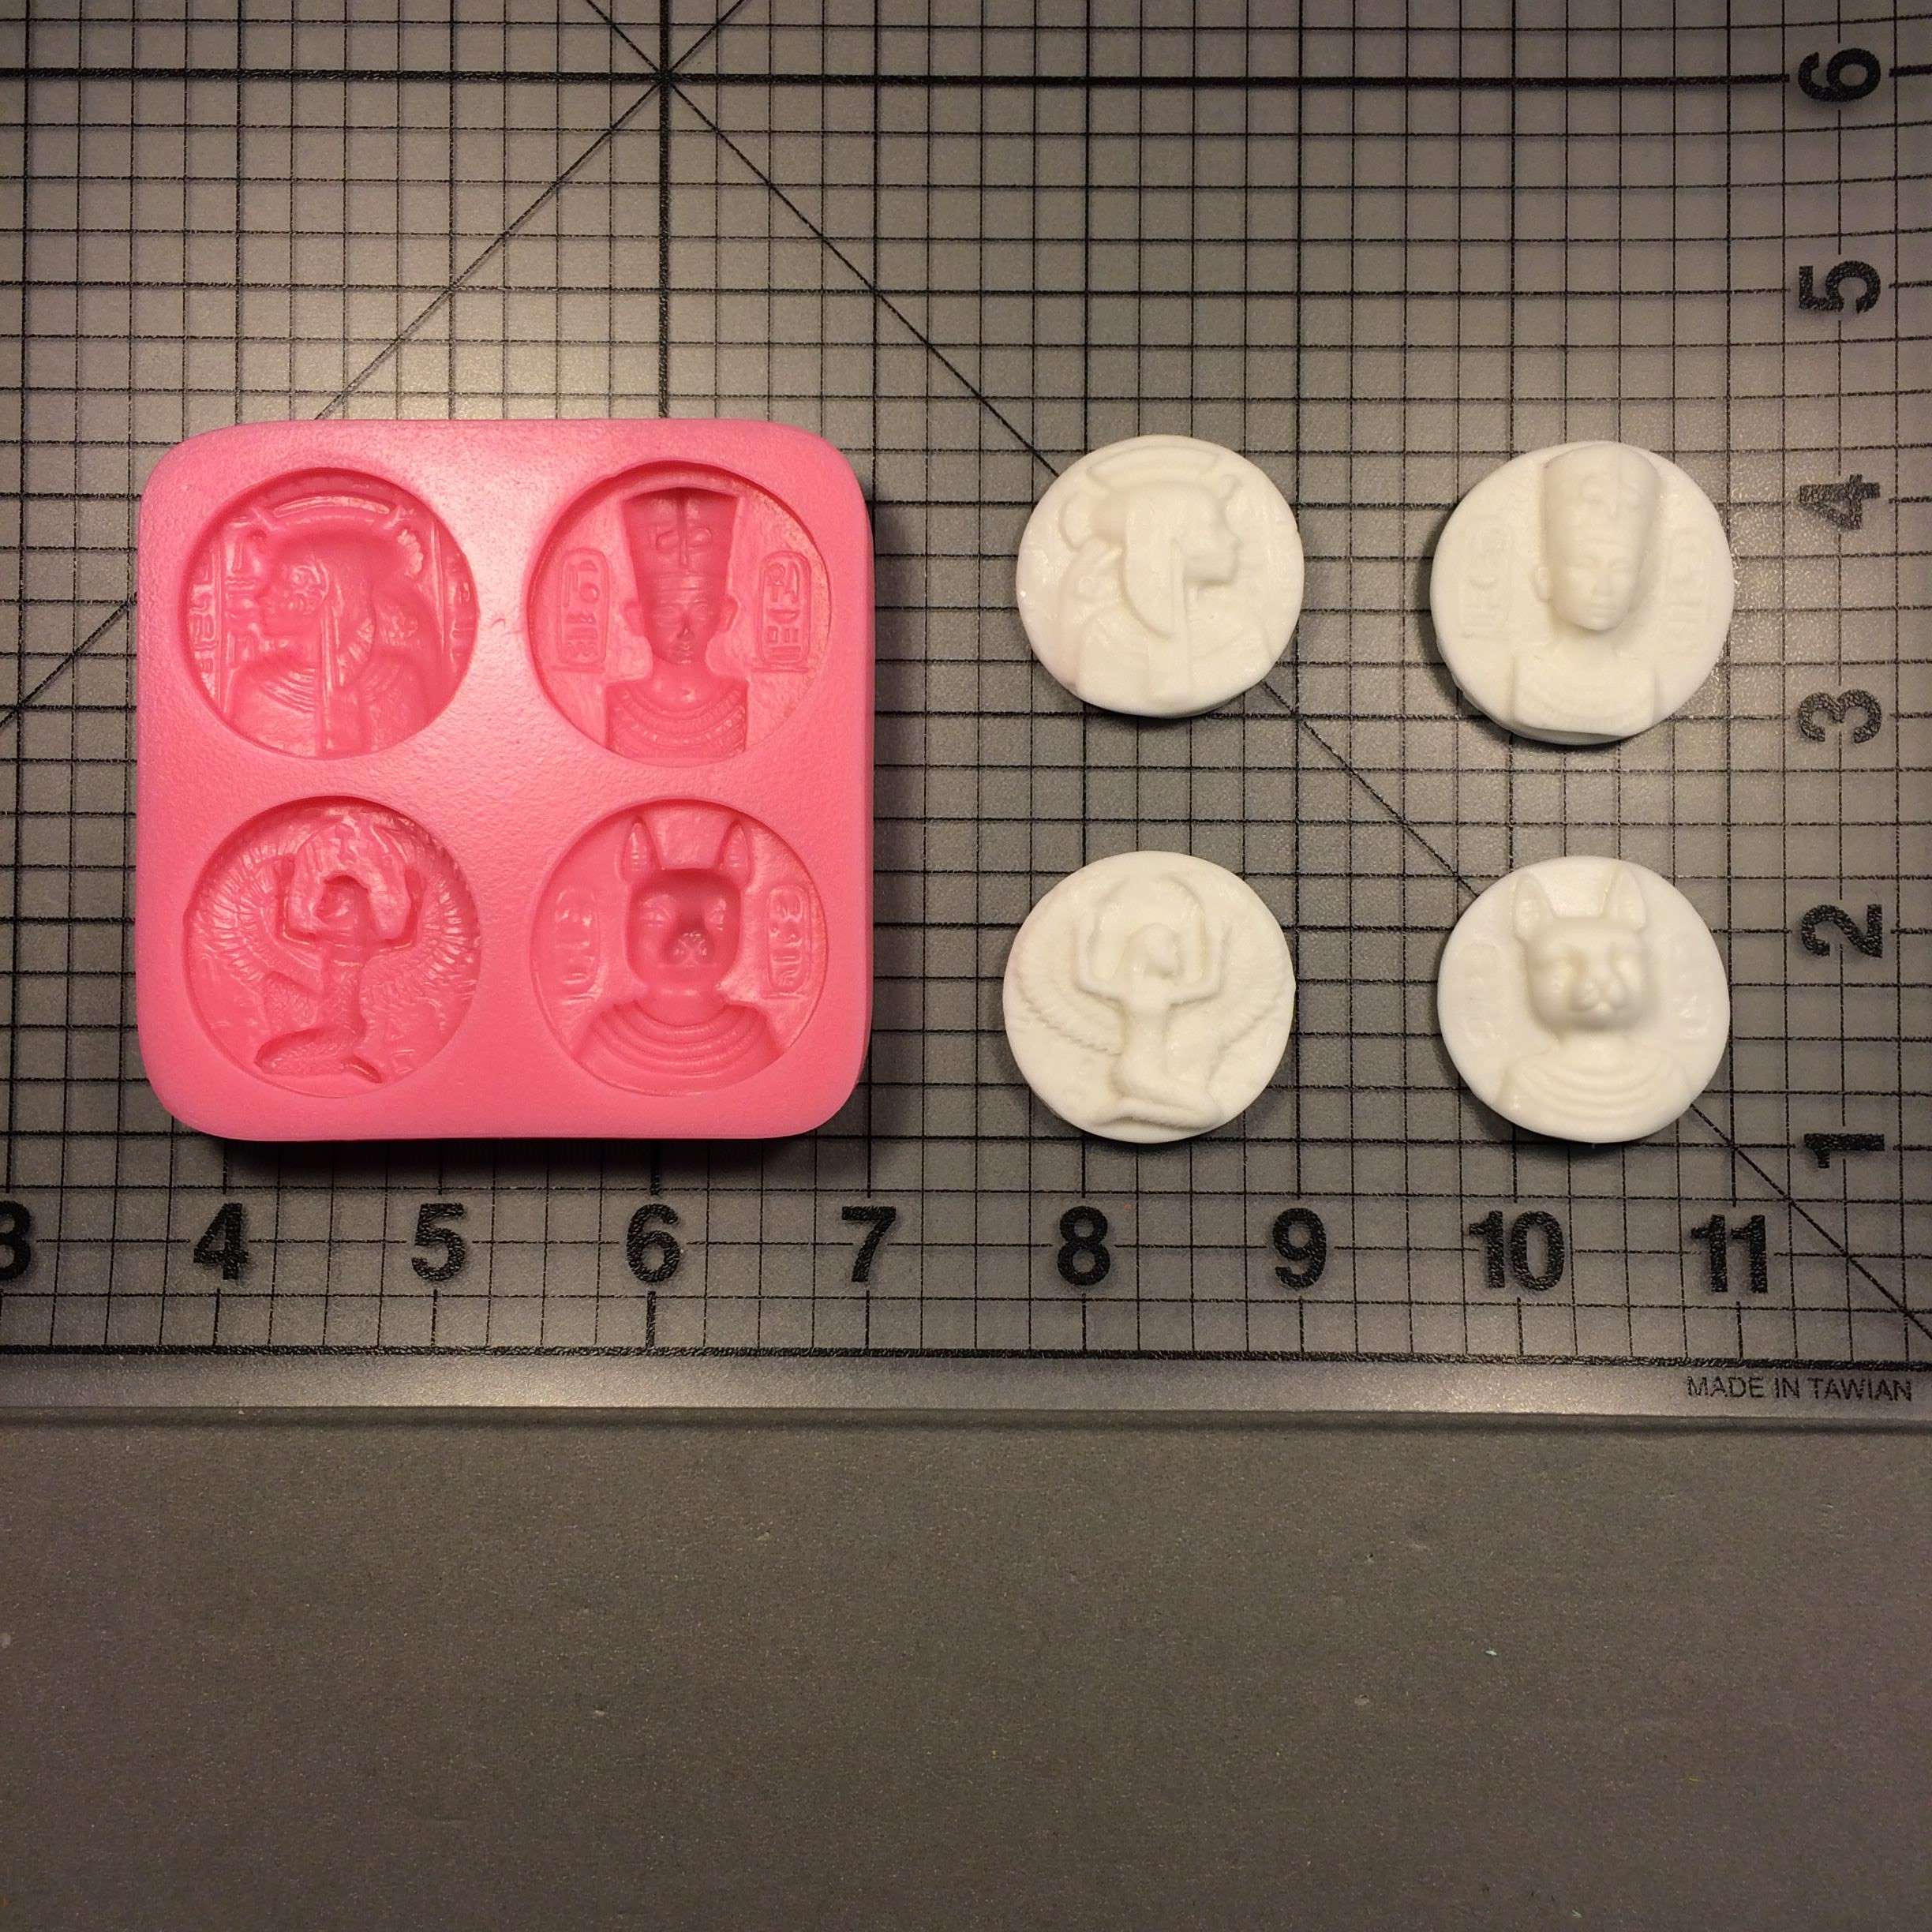 https://www.jbcookiecutters.com/wp-content/uploads/2017/07/Pharaoh-251-Silicone-Mold-1.jpg